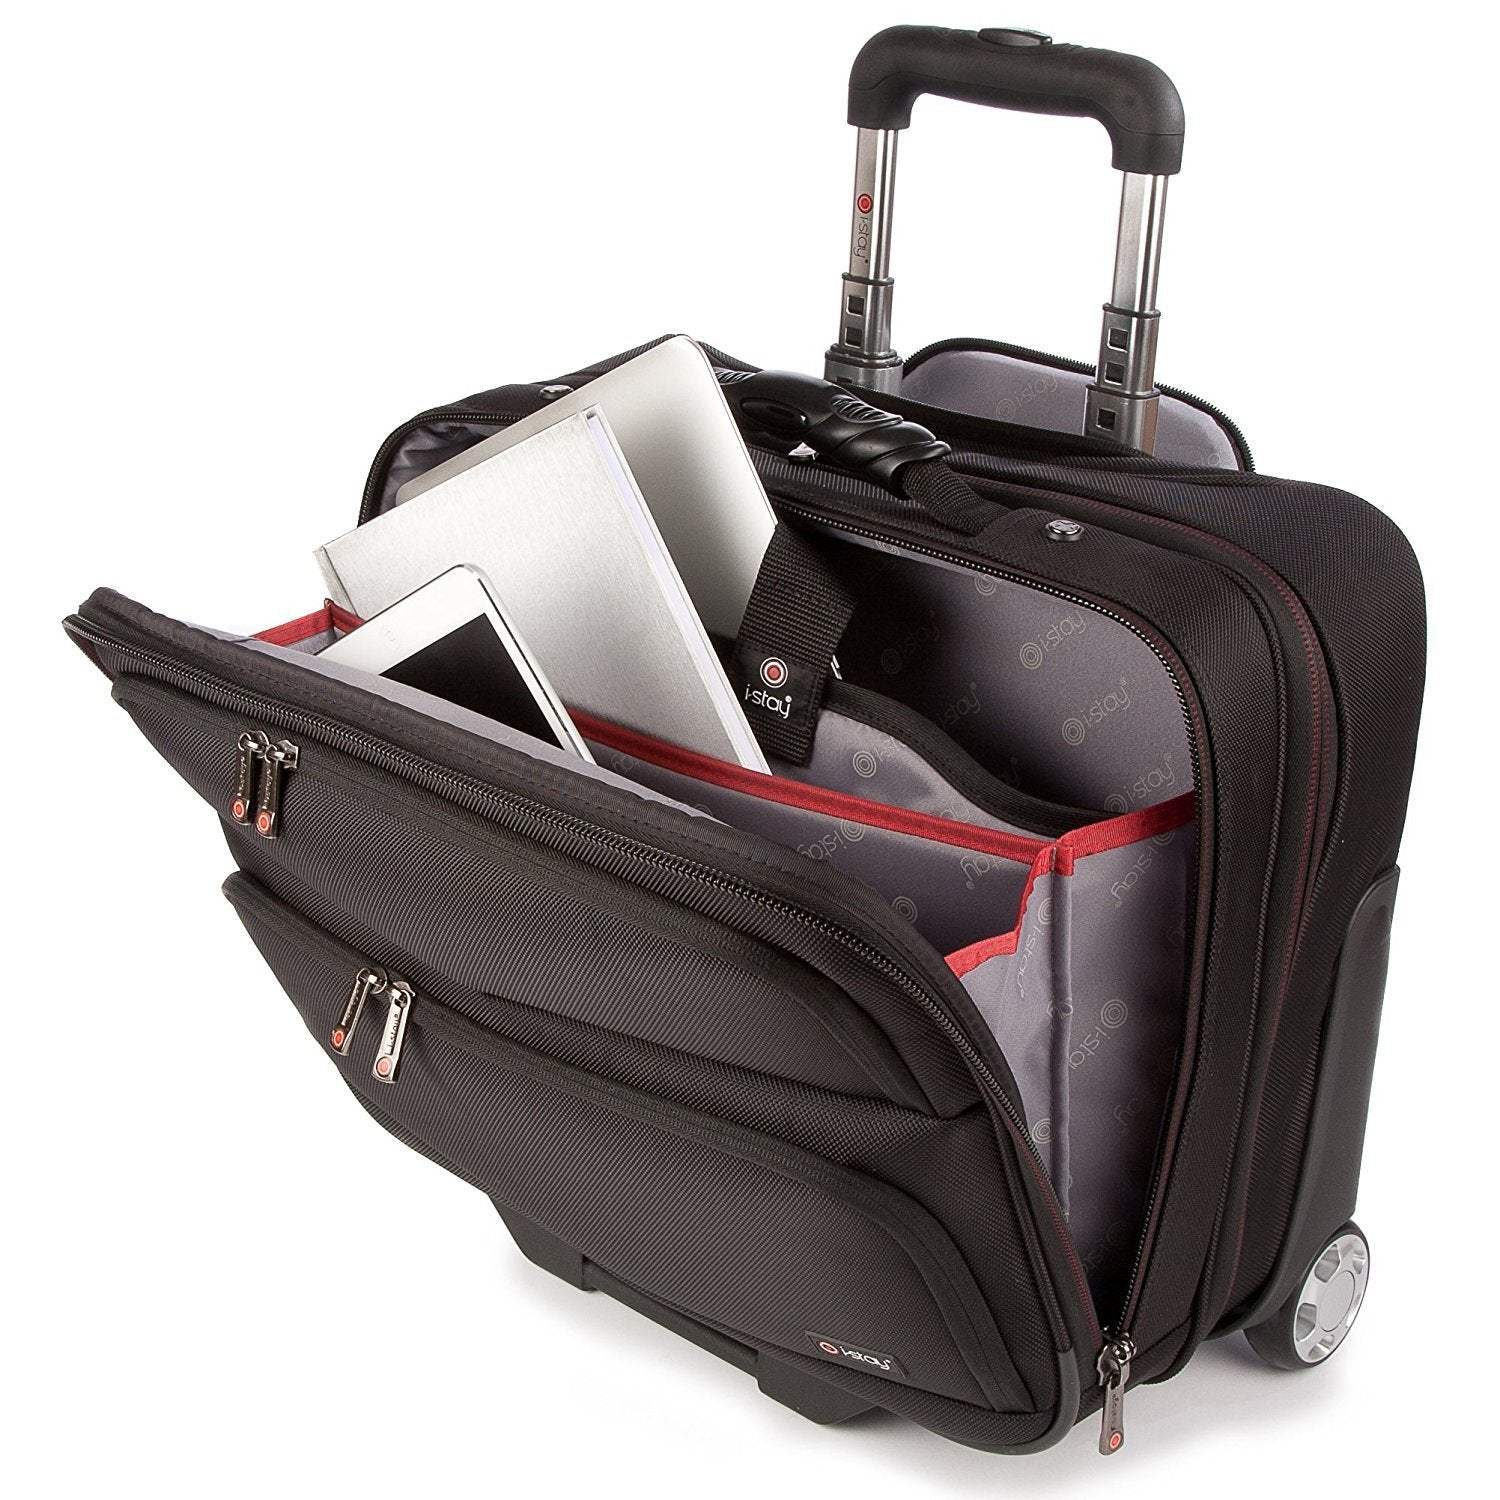 i-stay 15.6inch Laptop Tablet Business Trolley Case - The Luxury Promotional Gifts Company Limited